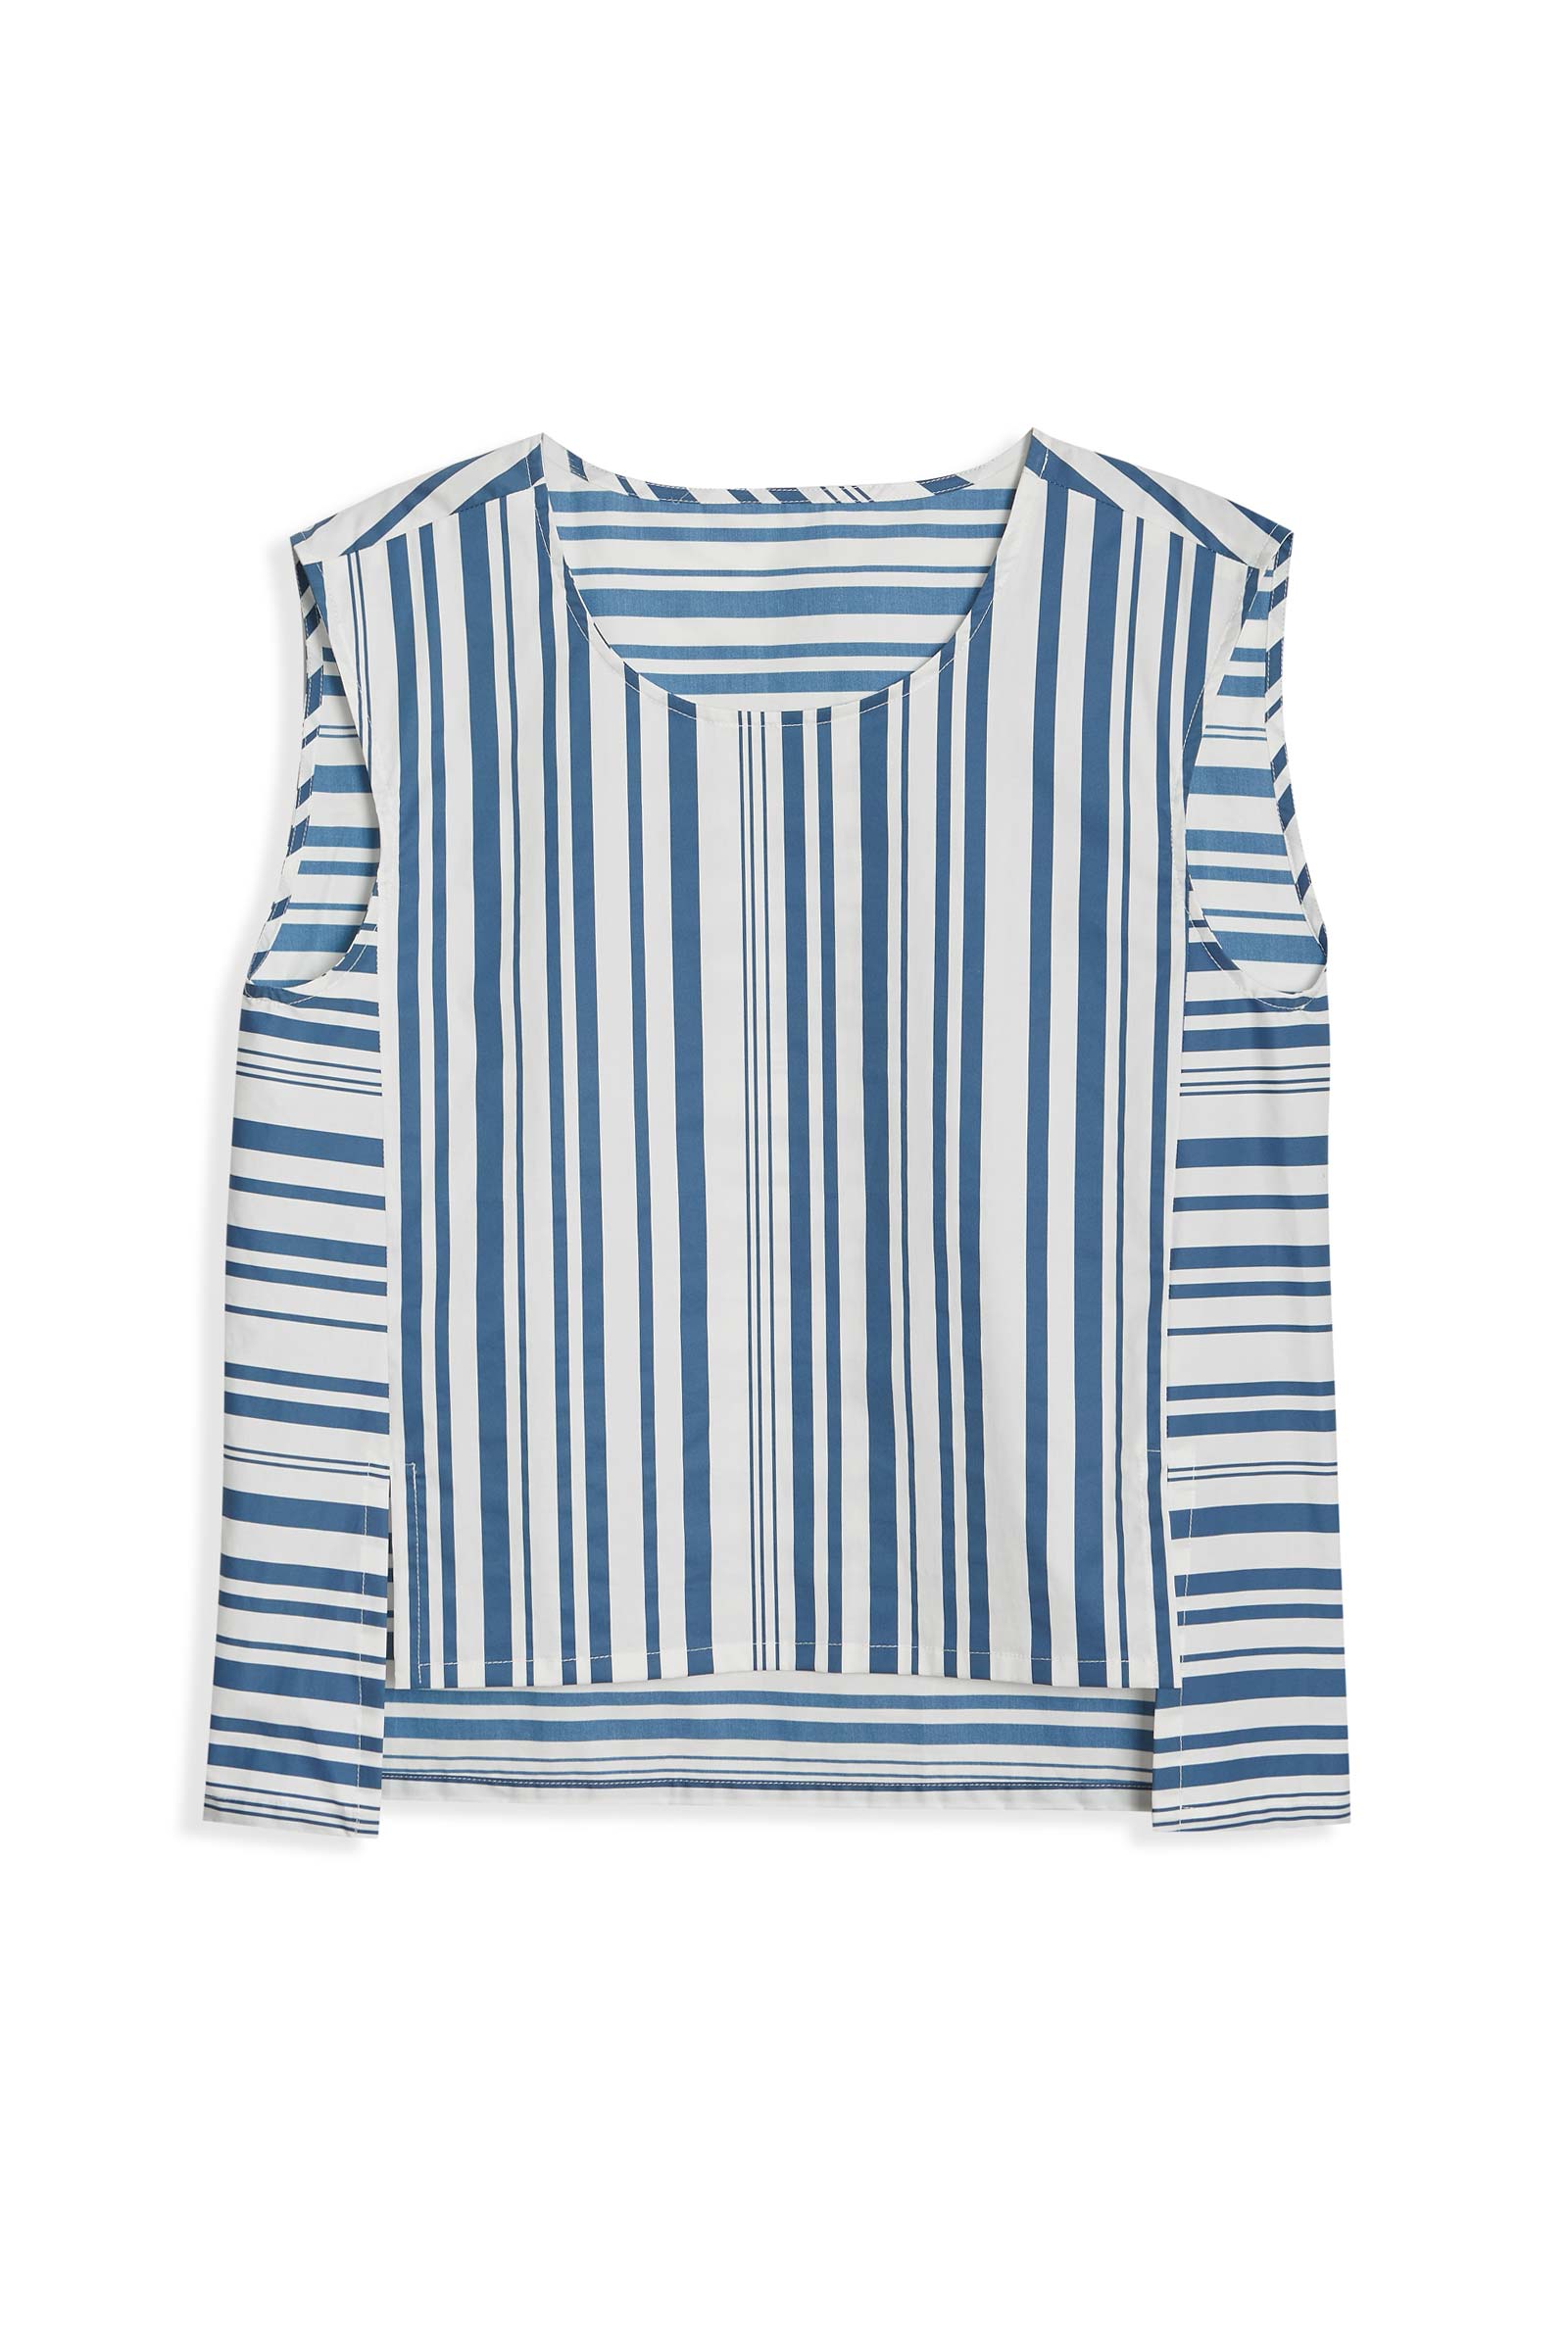 10 to 10 Striped cotton top product image